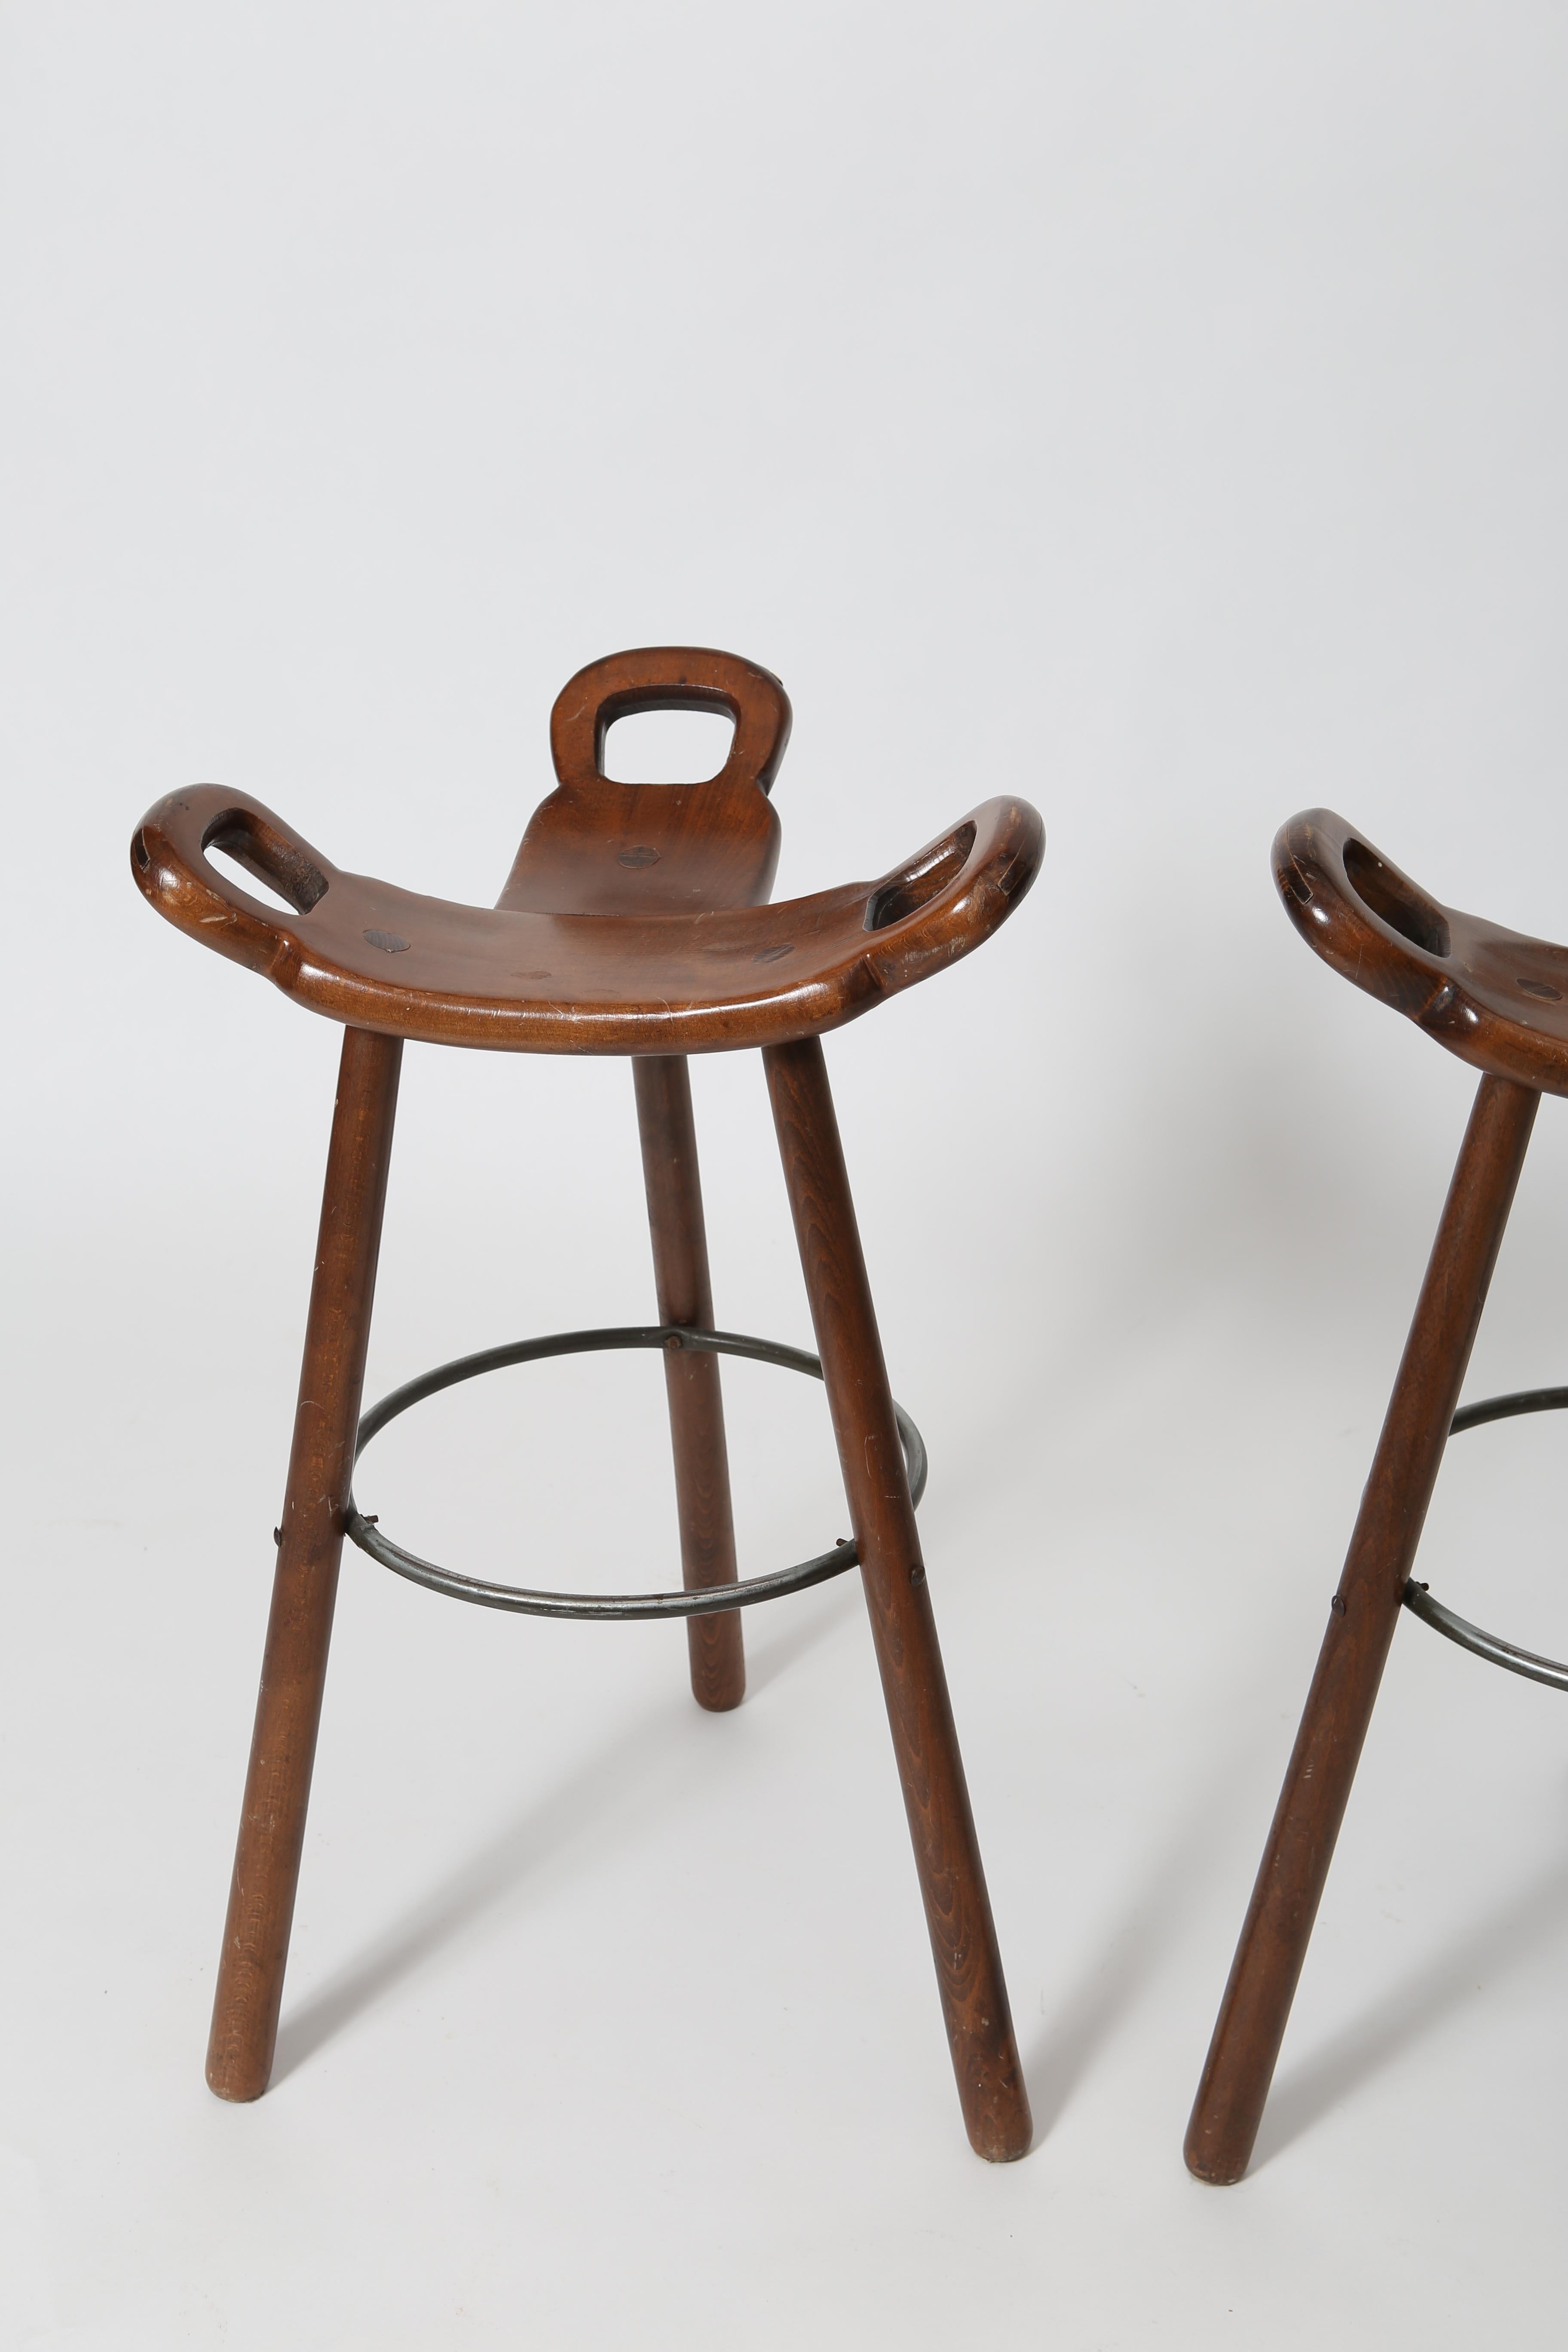 Stained Spanish Midcentury Brutalist Barstools, a Pair For Sale